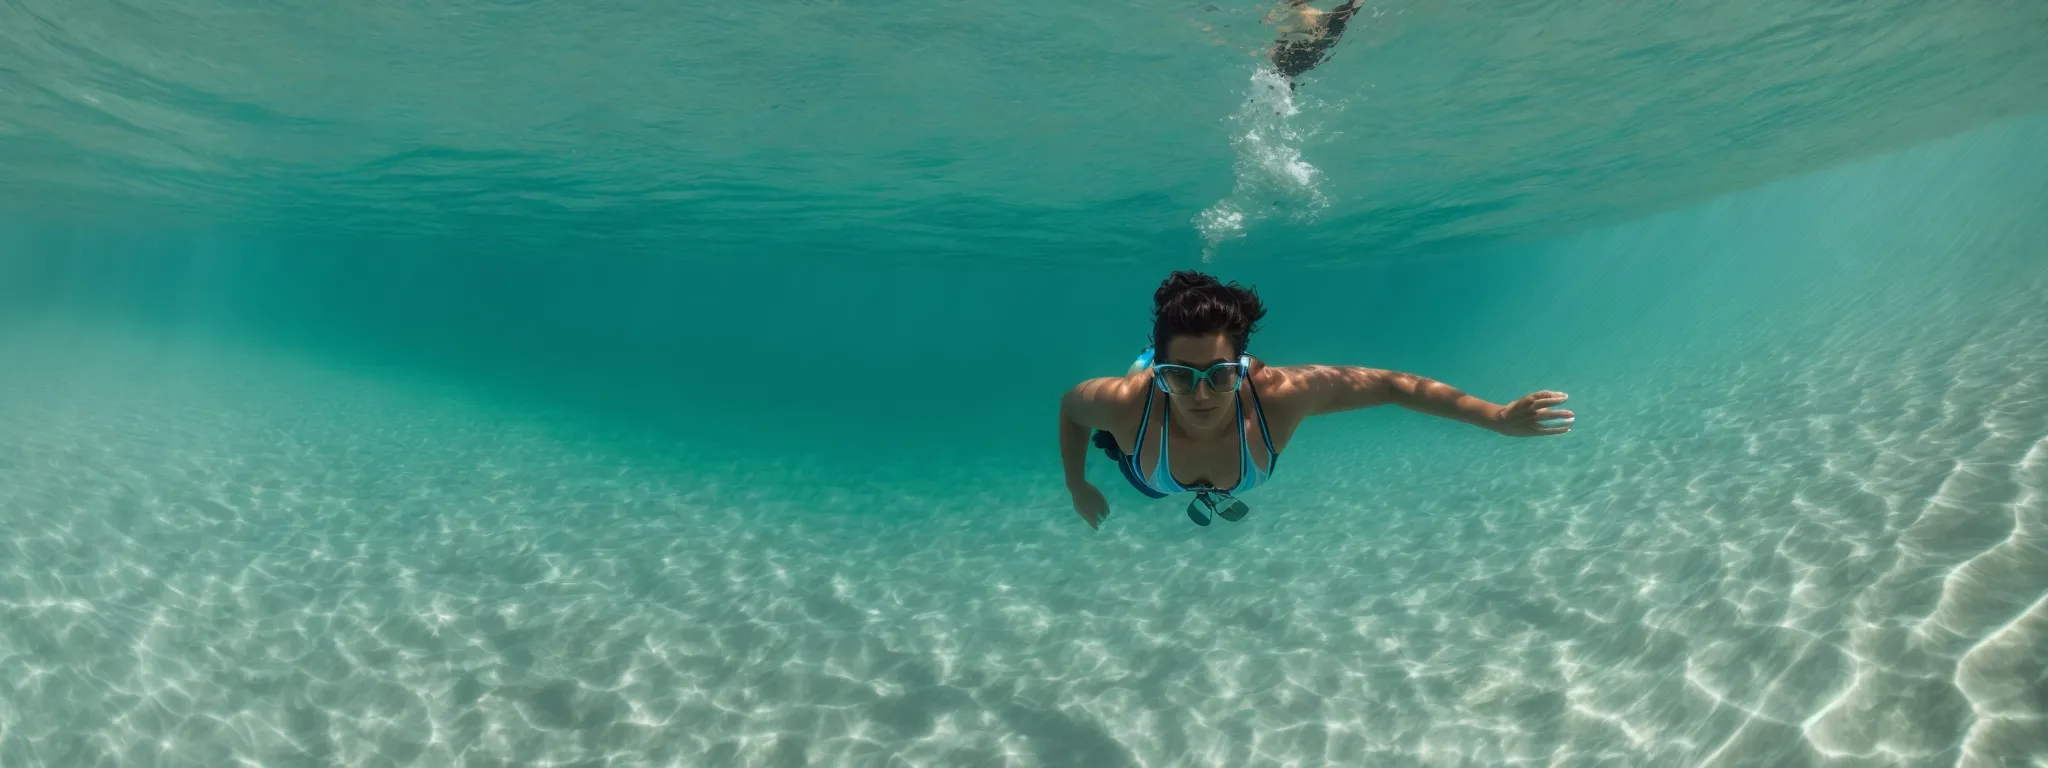 a person diving into crystal-clear water, symbolizing the deep dive into seo keyword optimization strategies.